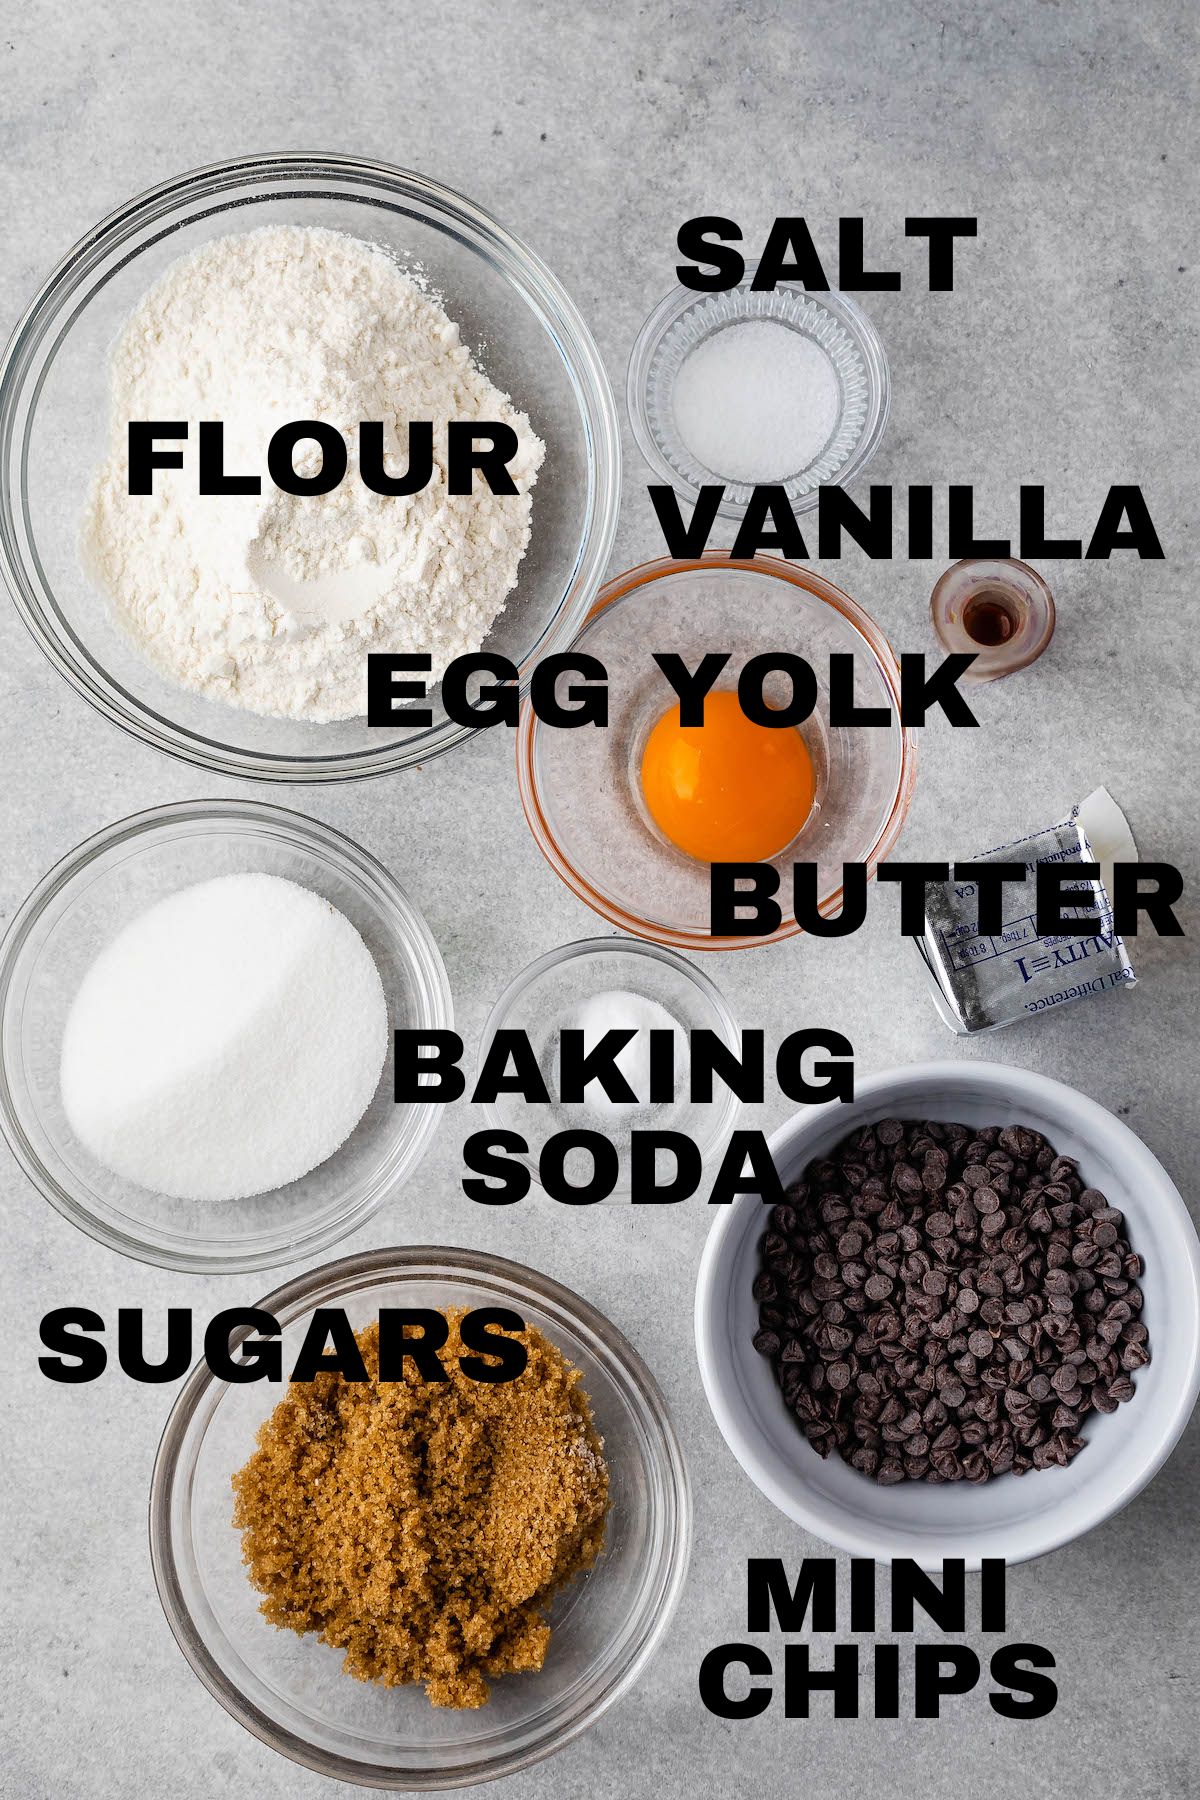 INGREDIENTS IN SMALL BATCH COOKIES